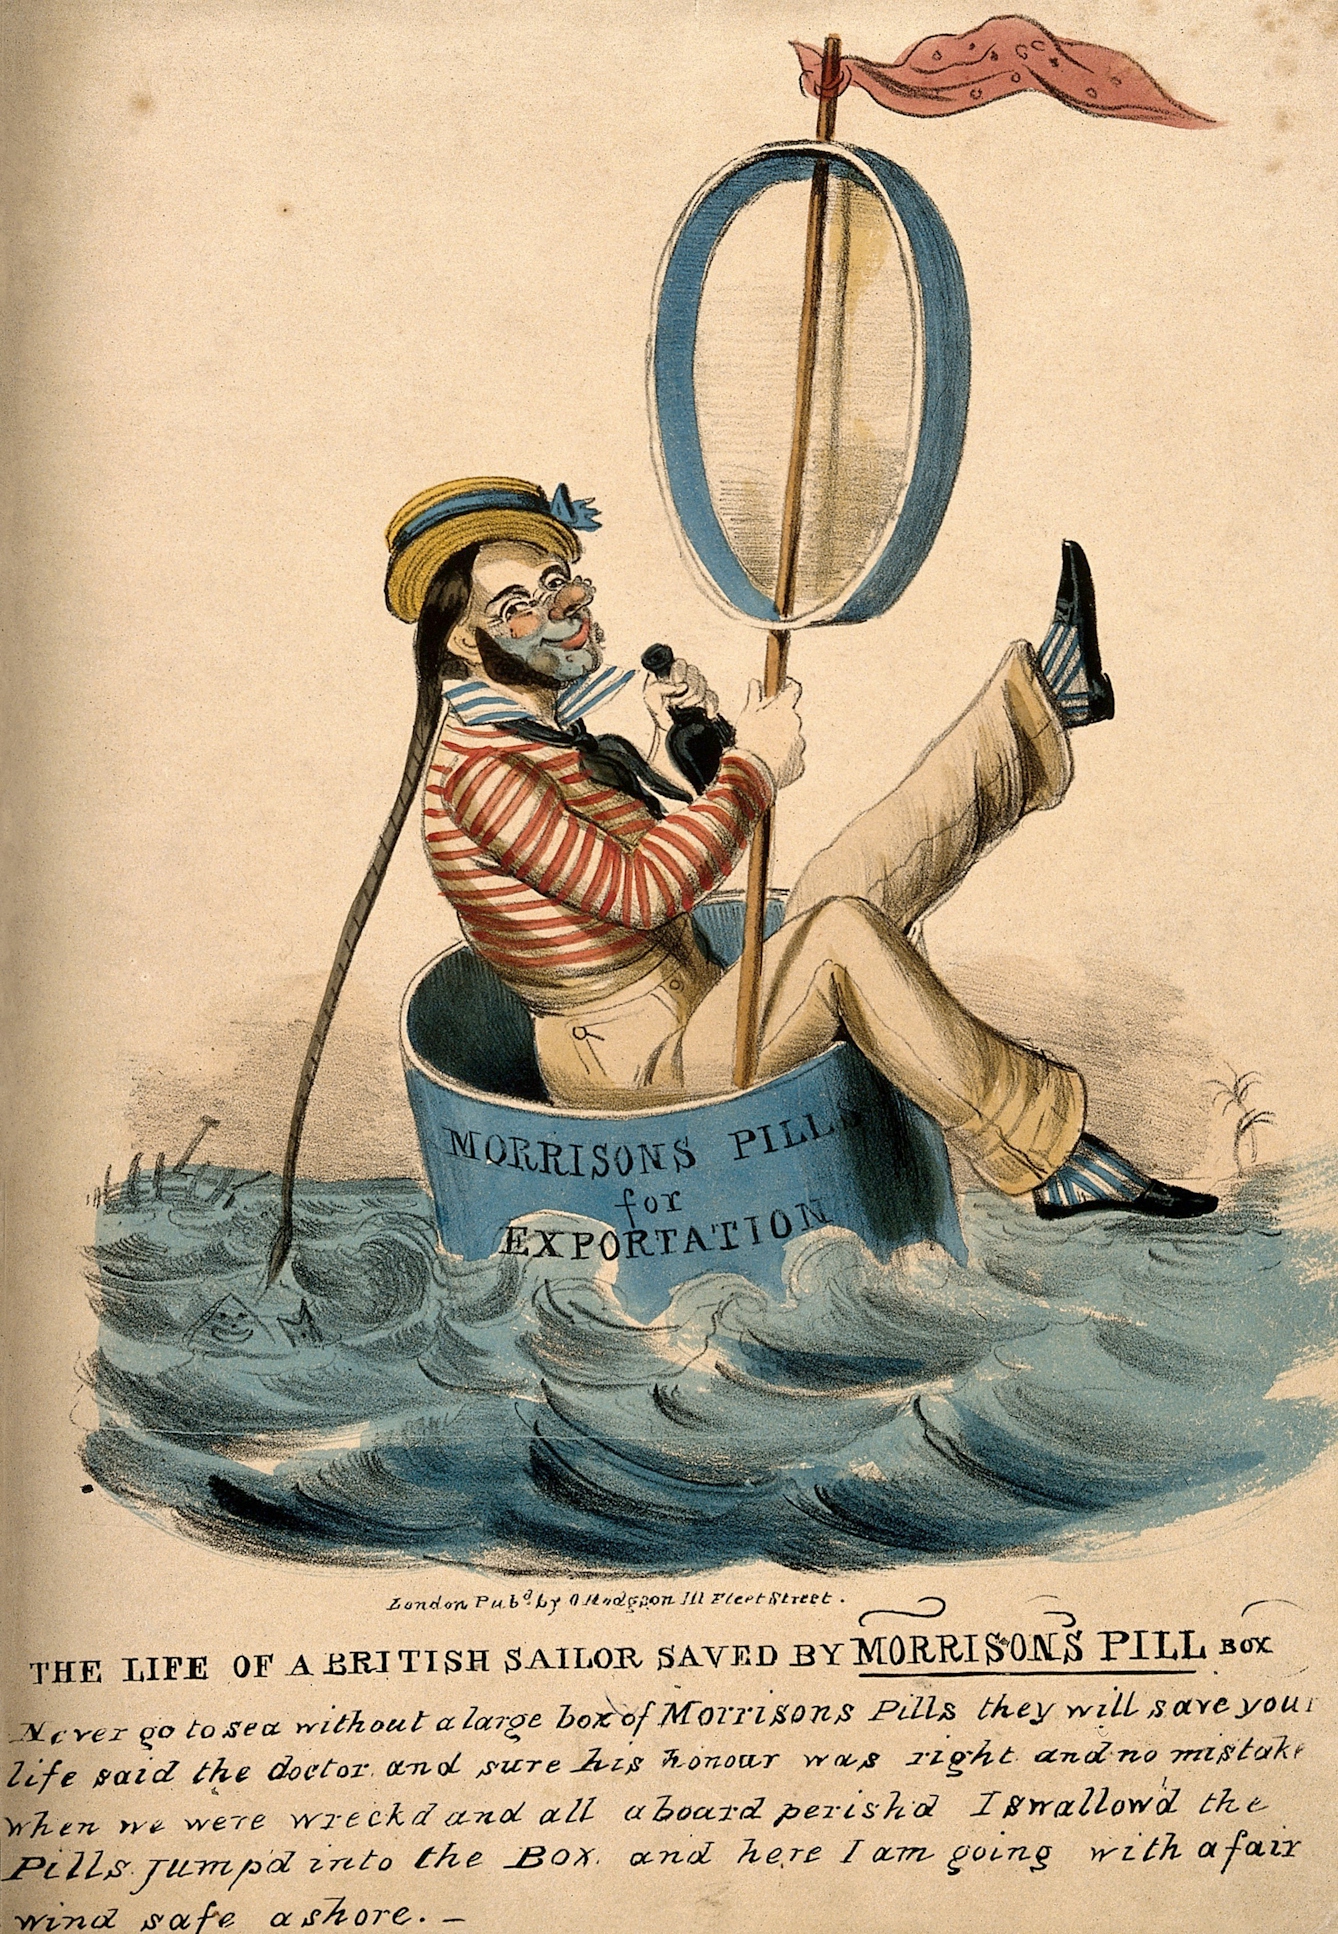 A sailor happily sailing in a giant box labelled "Morrison's Pills for Exportation"